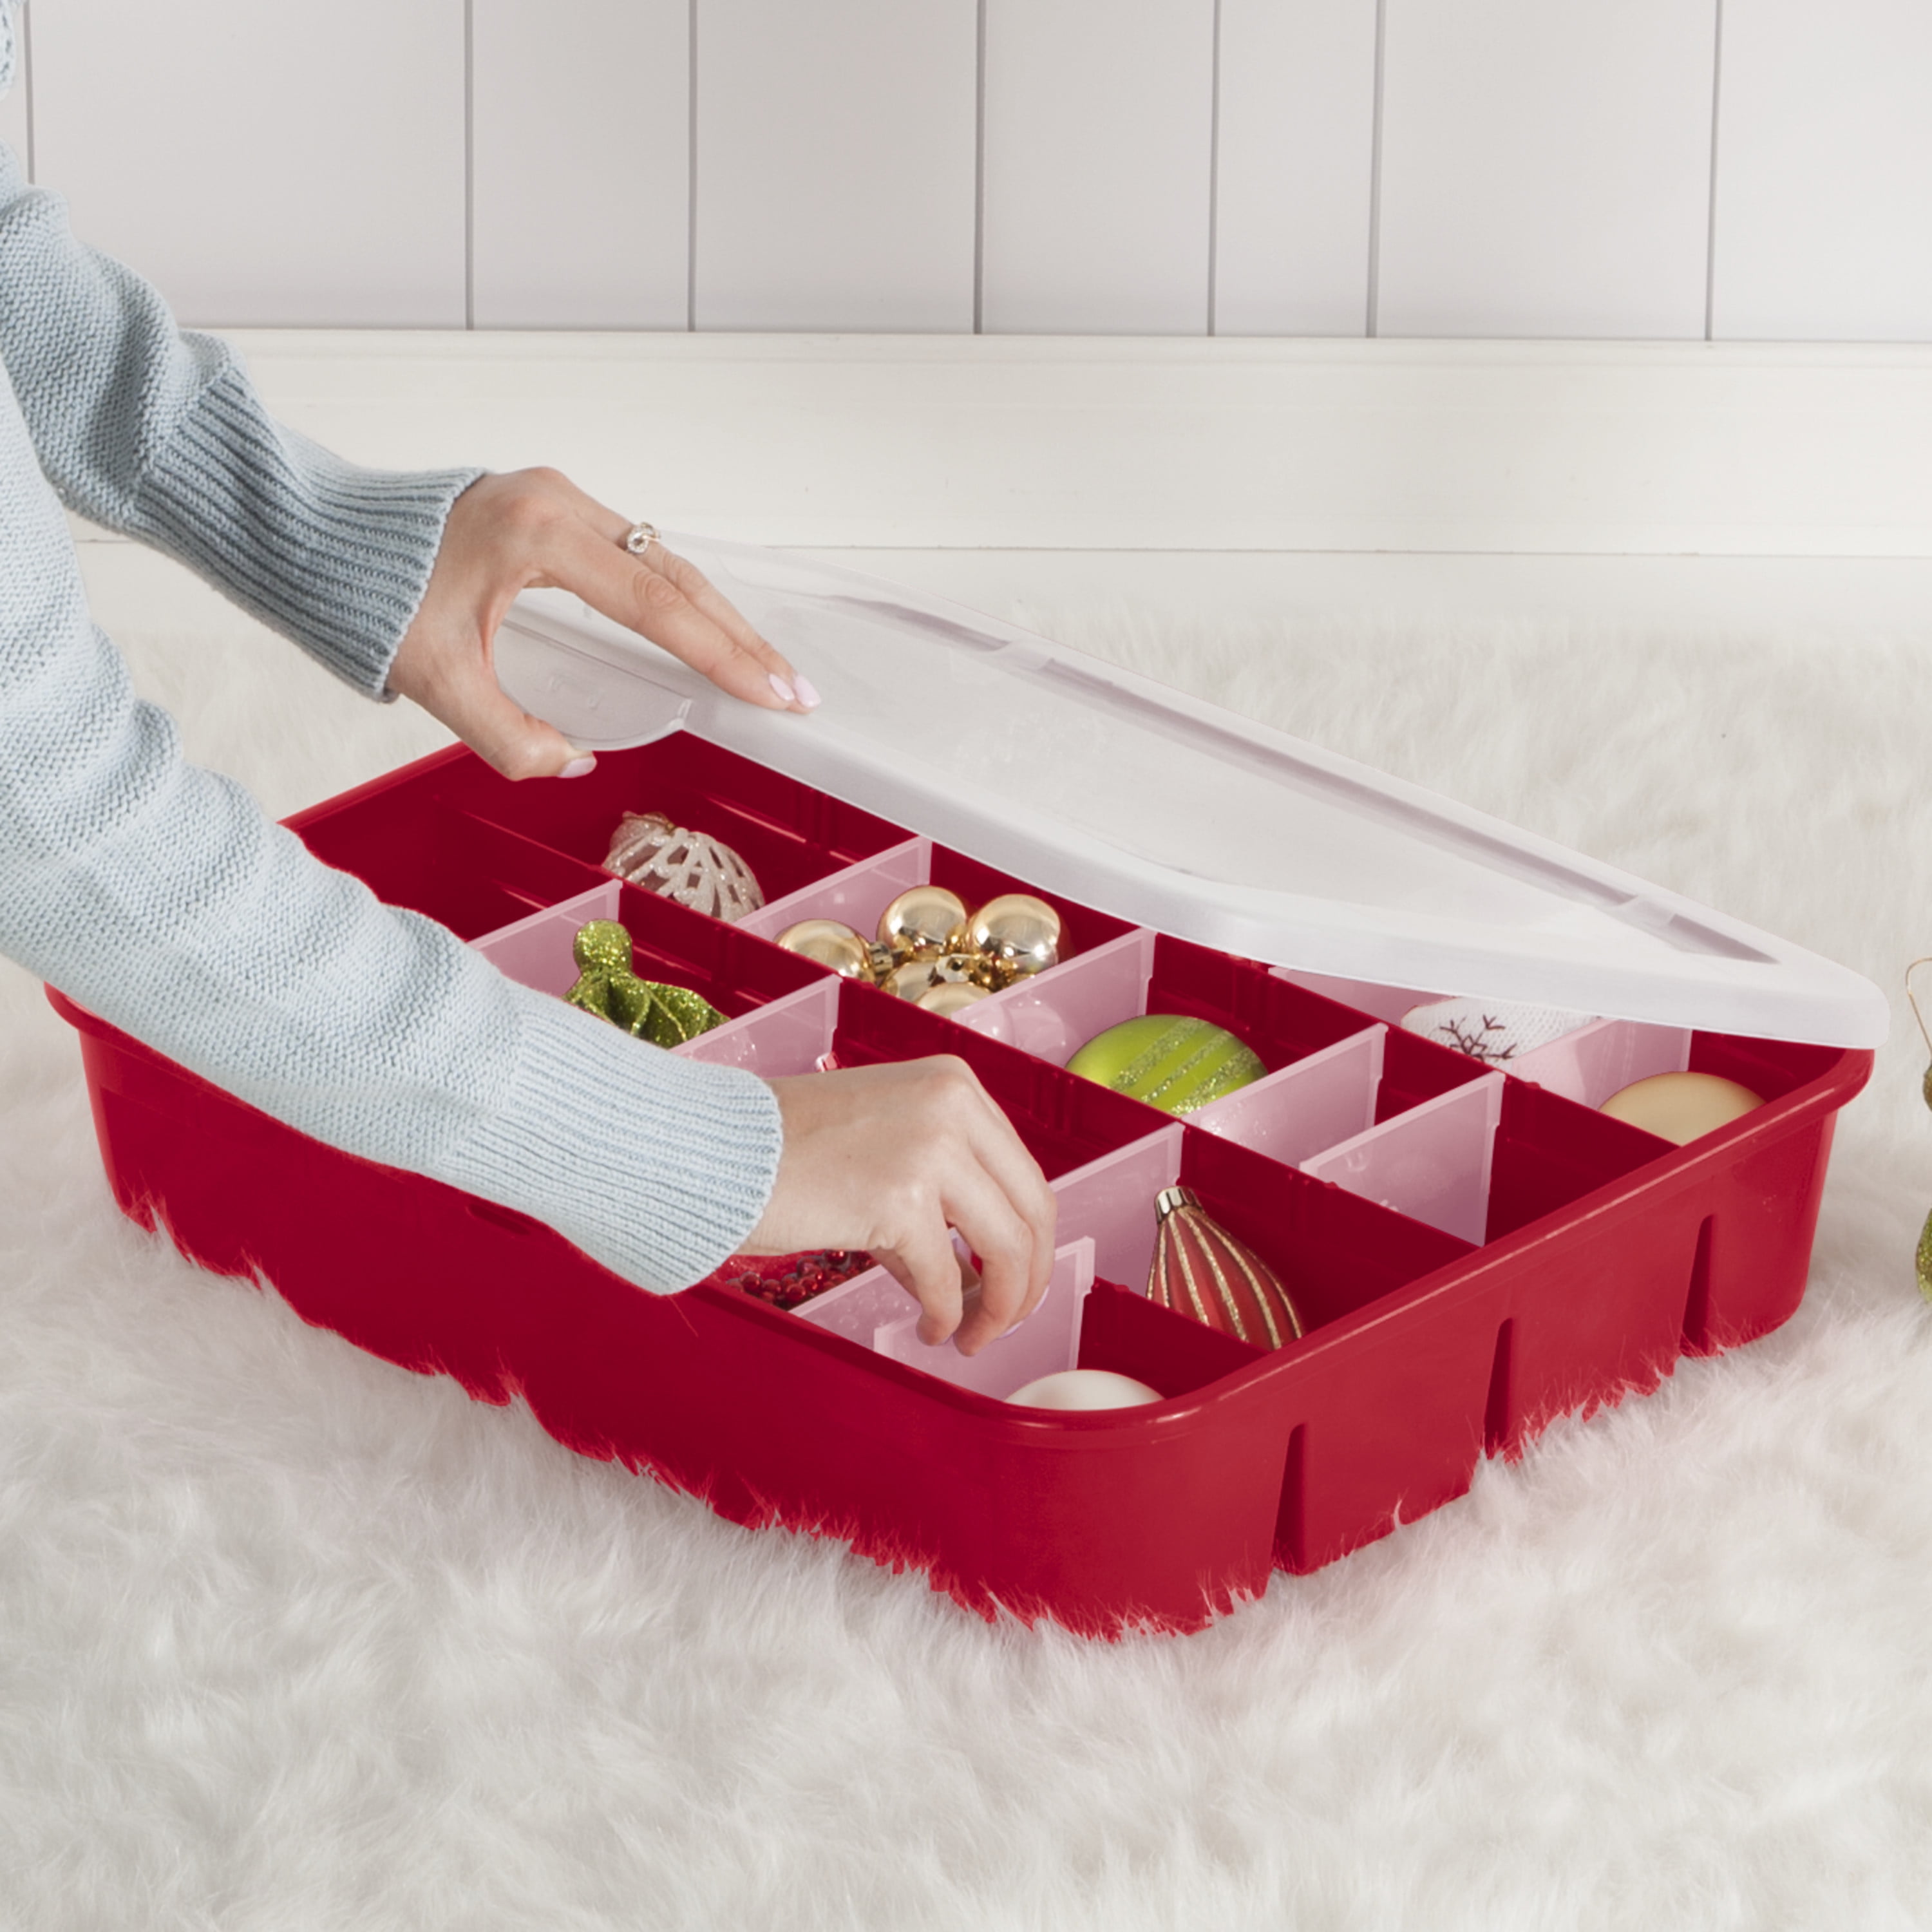 OSTO 13.5-in x 7-in 96-Compartment Red Plastic Adjustable Compartments  Ornament Storage Box at